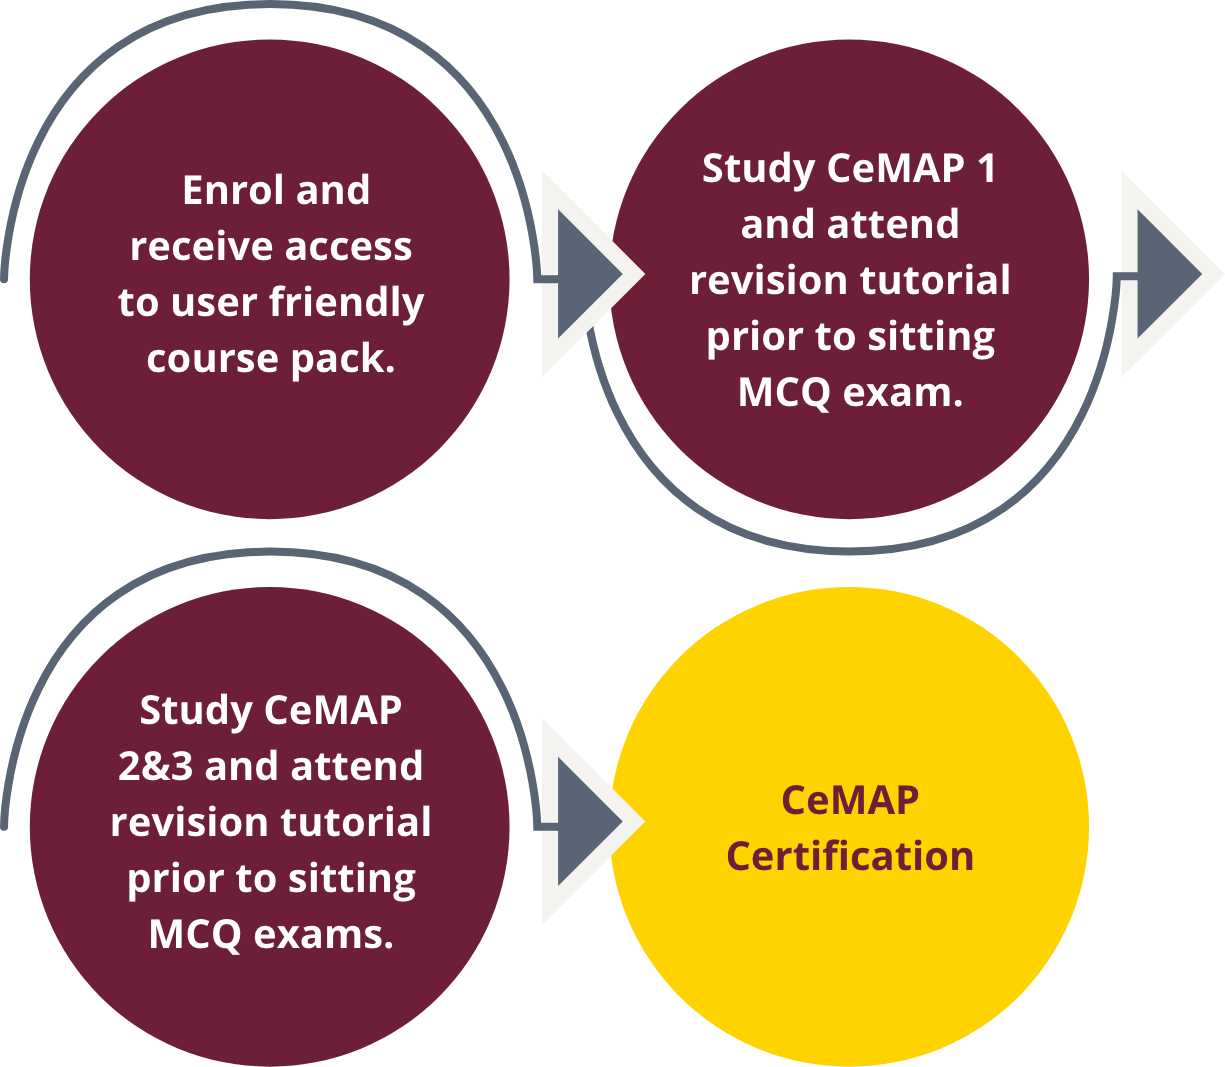 CeMAP E-learning journey